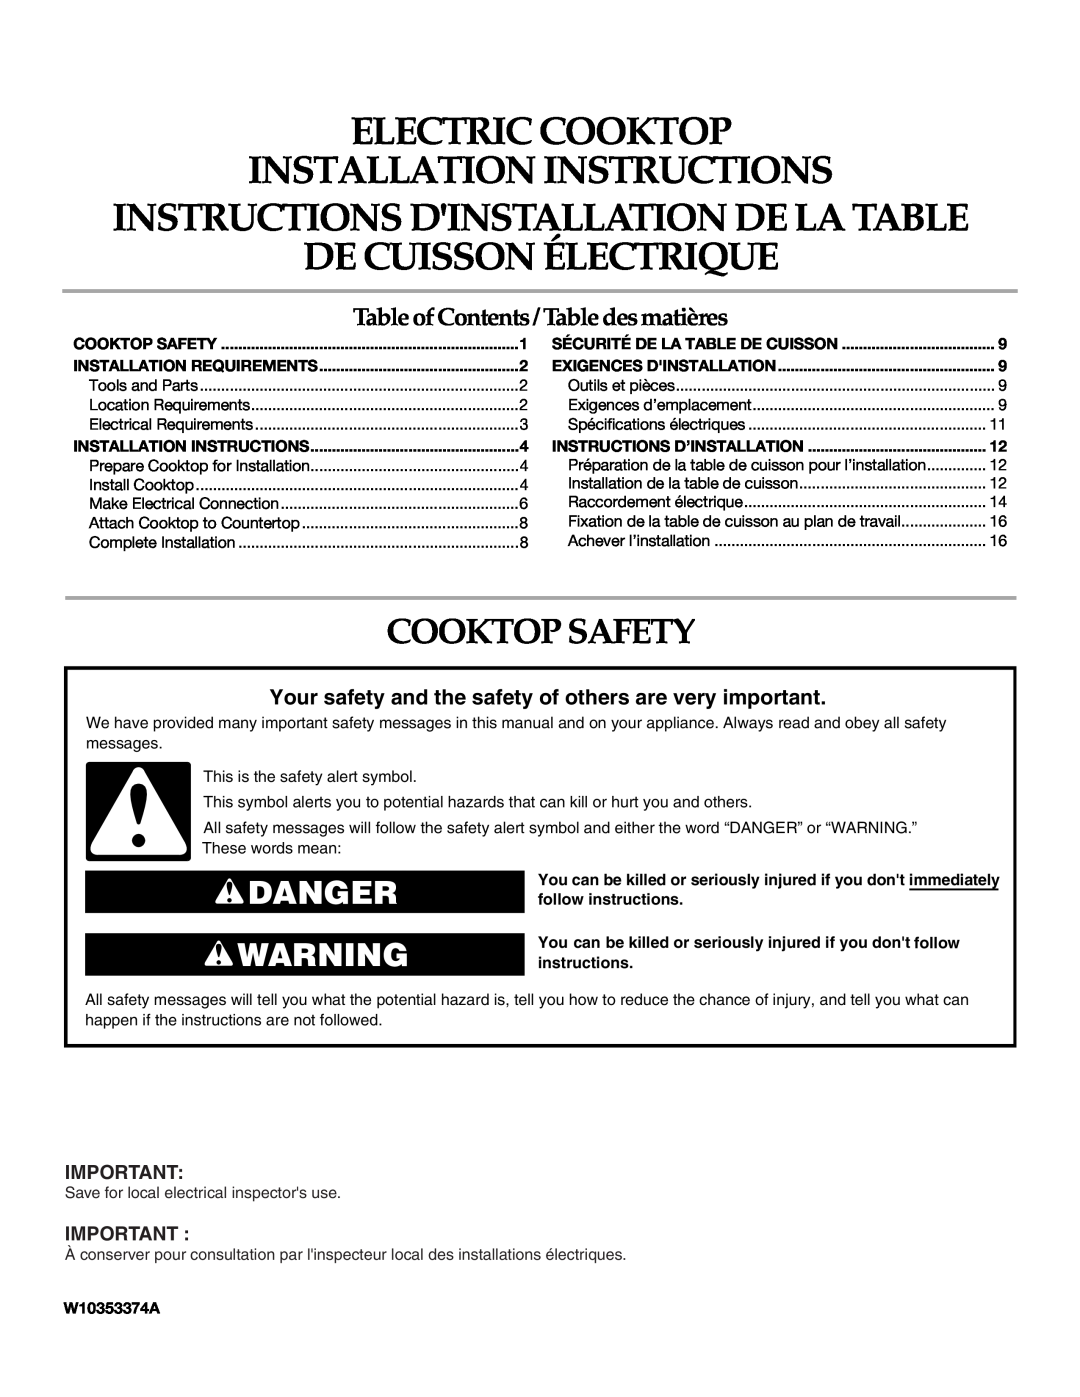 Whirlpool W10353374A installation instructions Cooktop Safety, Danger, Electric Cooktop Installation Instructions 